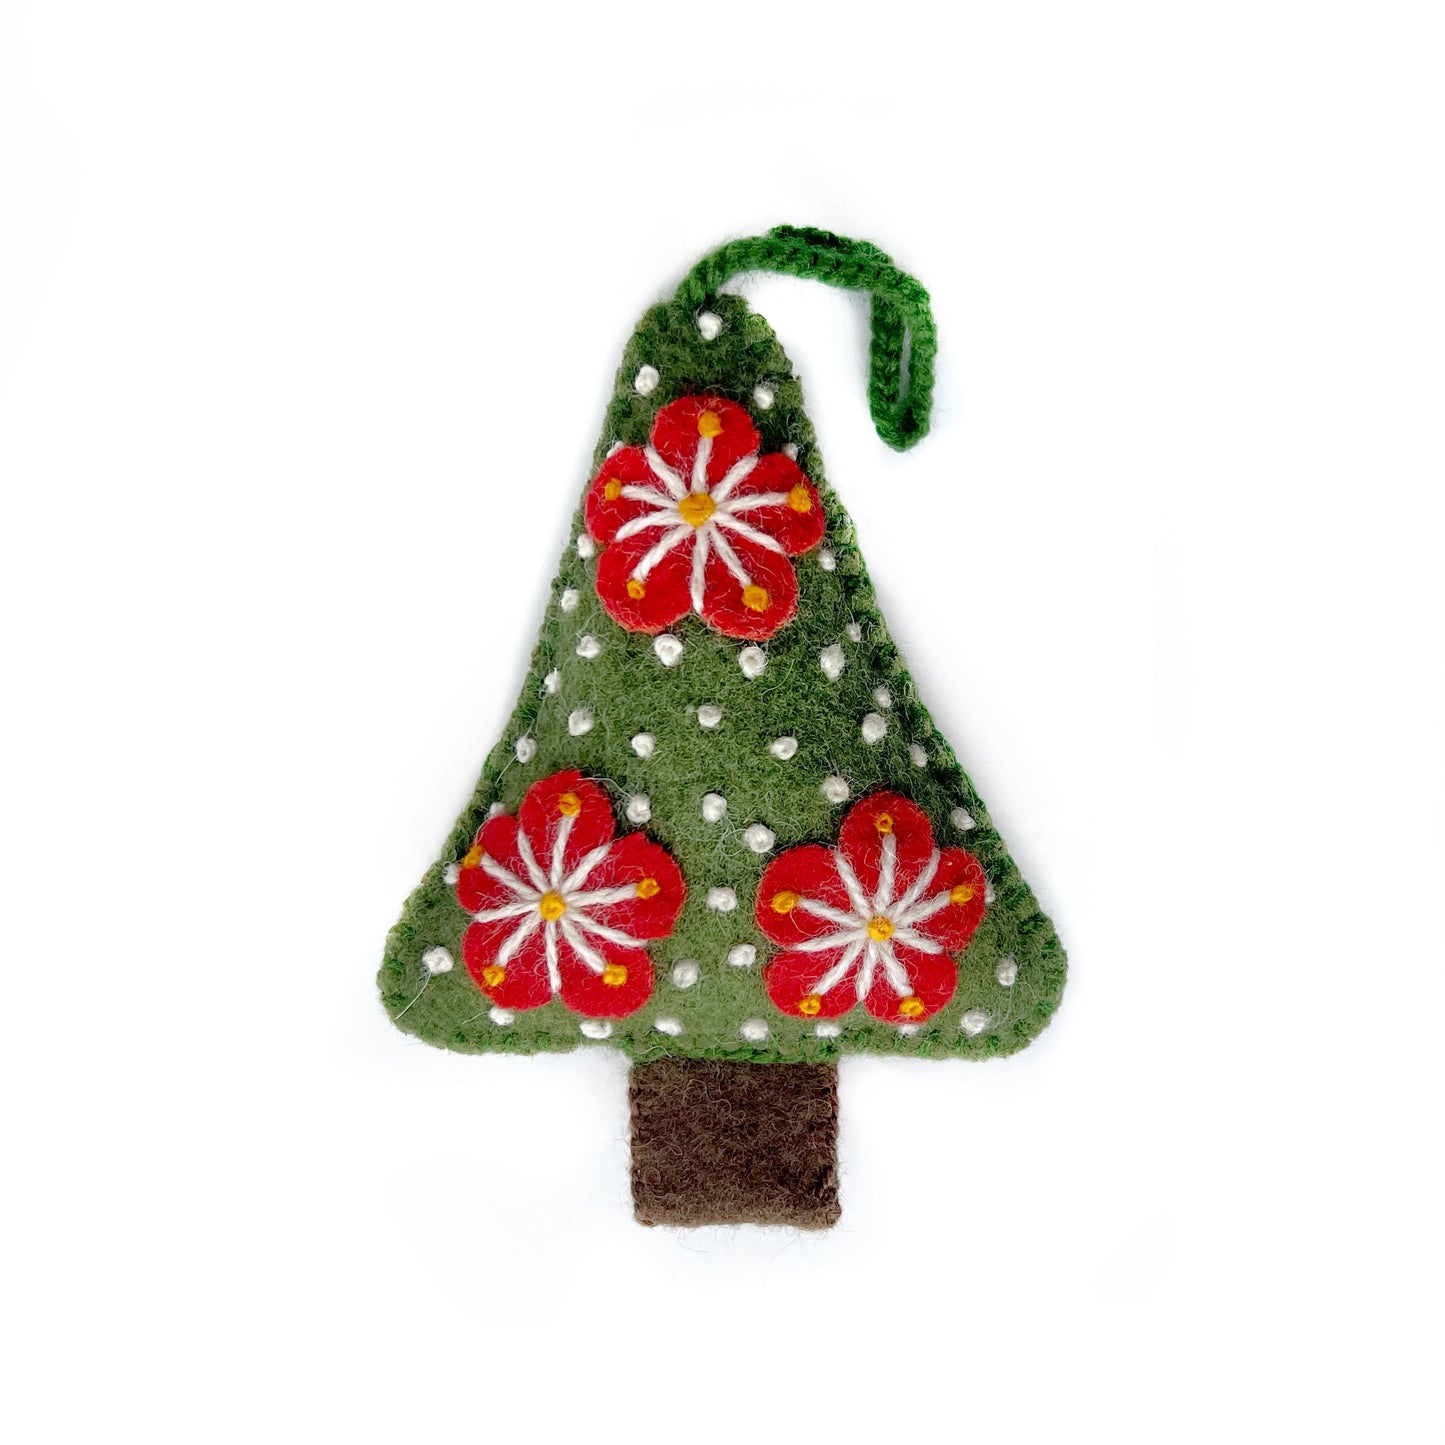 Green Christmas Tree Embroidered Knit Wool Ornament